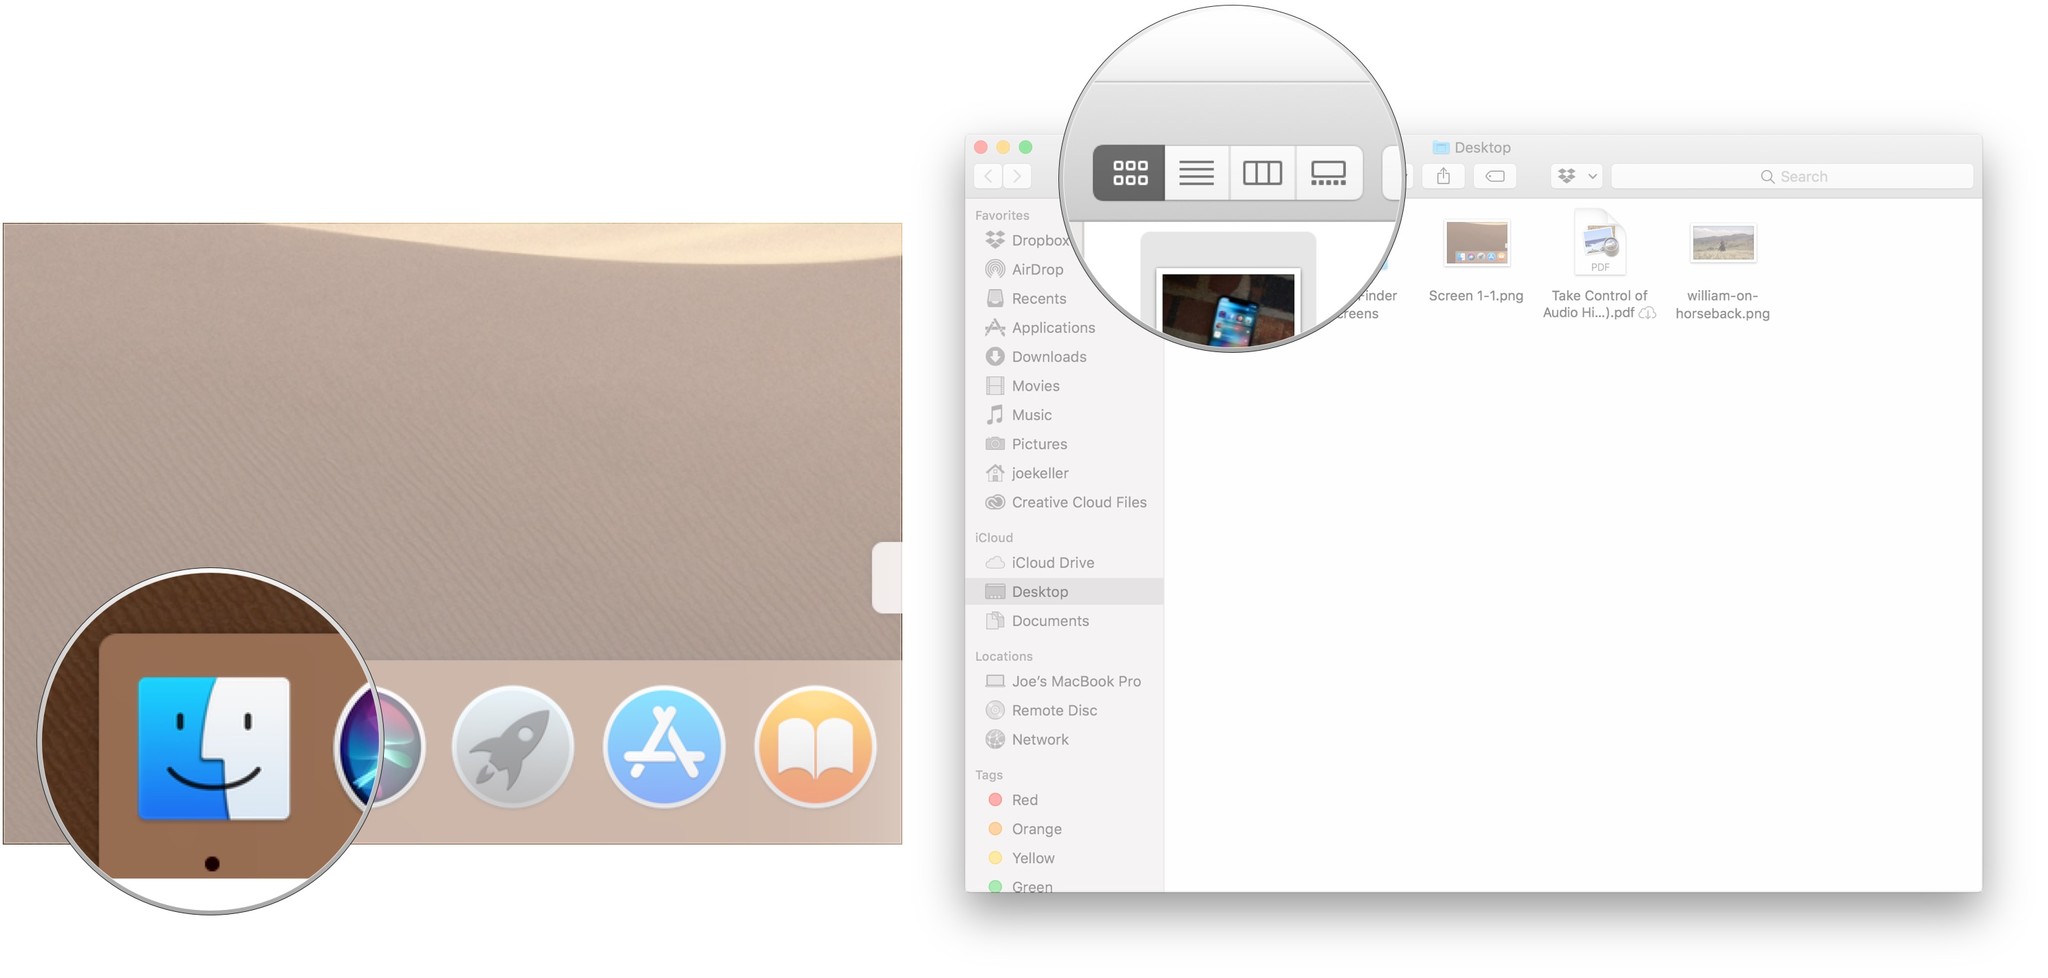 To view file metadata in Finder, click on the Finder icon, then choose the view to use.